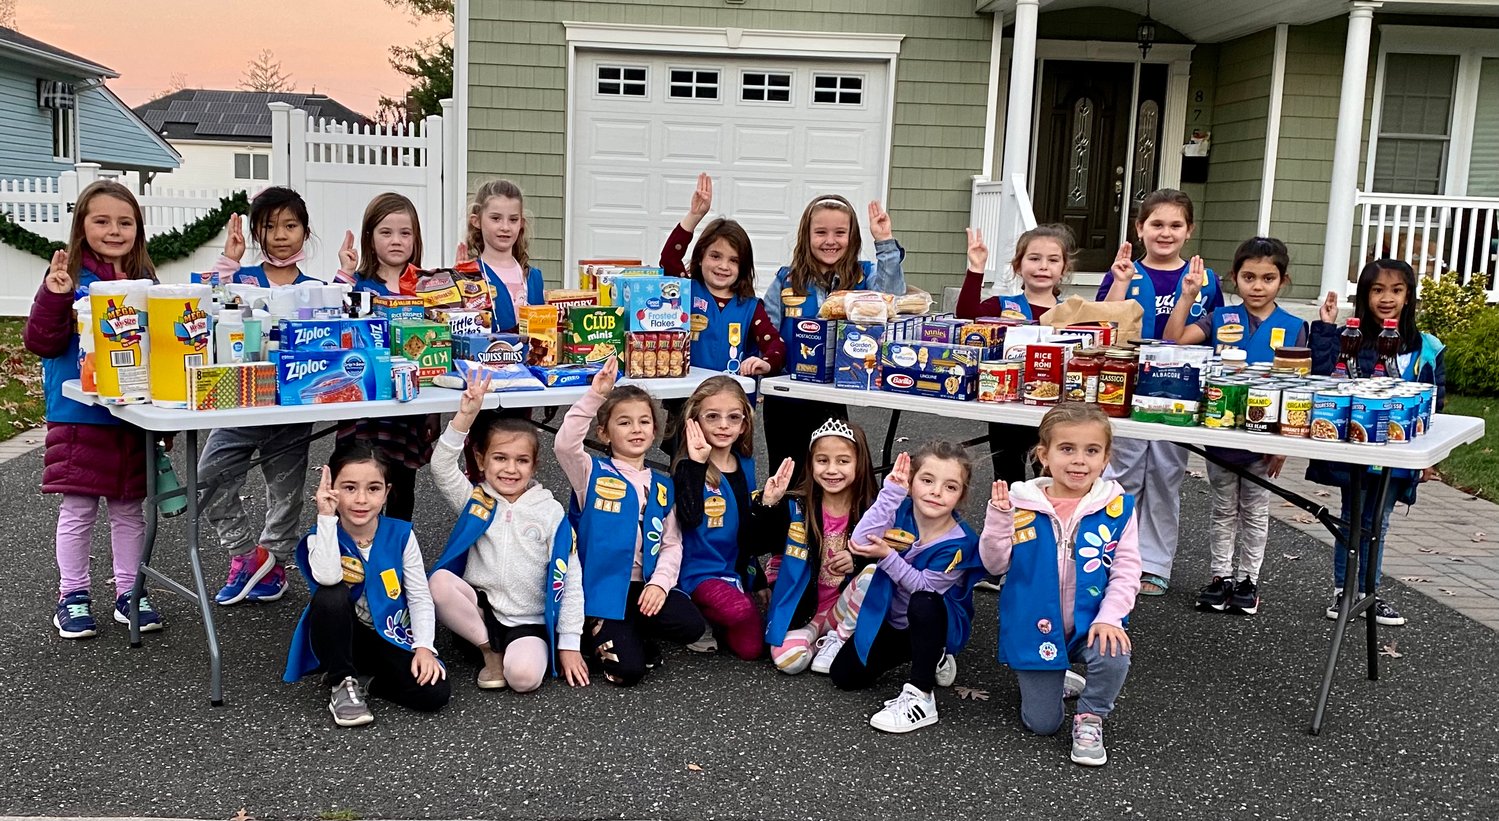 Daisy Troop 946 from John G. Dinkelmyer Elementary School ran a food and supply drive for the Bellmore-Merrick Central High School District’s Community Cupboard.